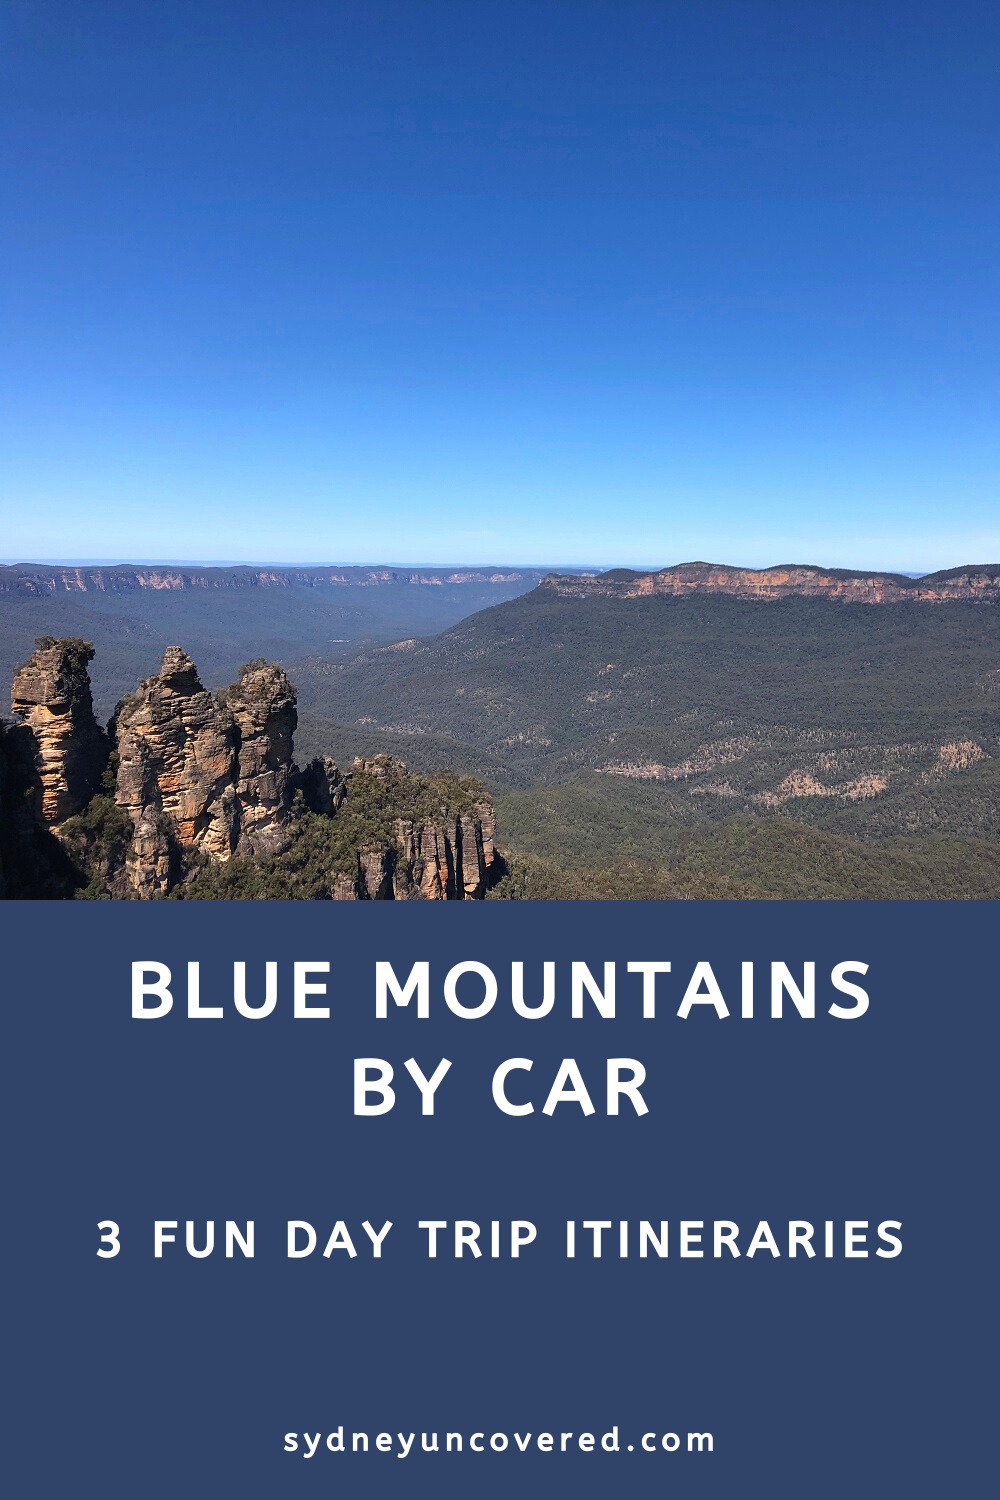 Visit the Blue Mountains by car (3 itineraries)